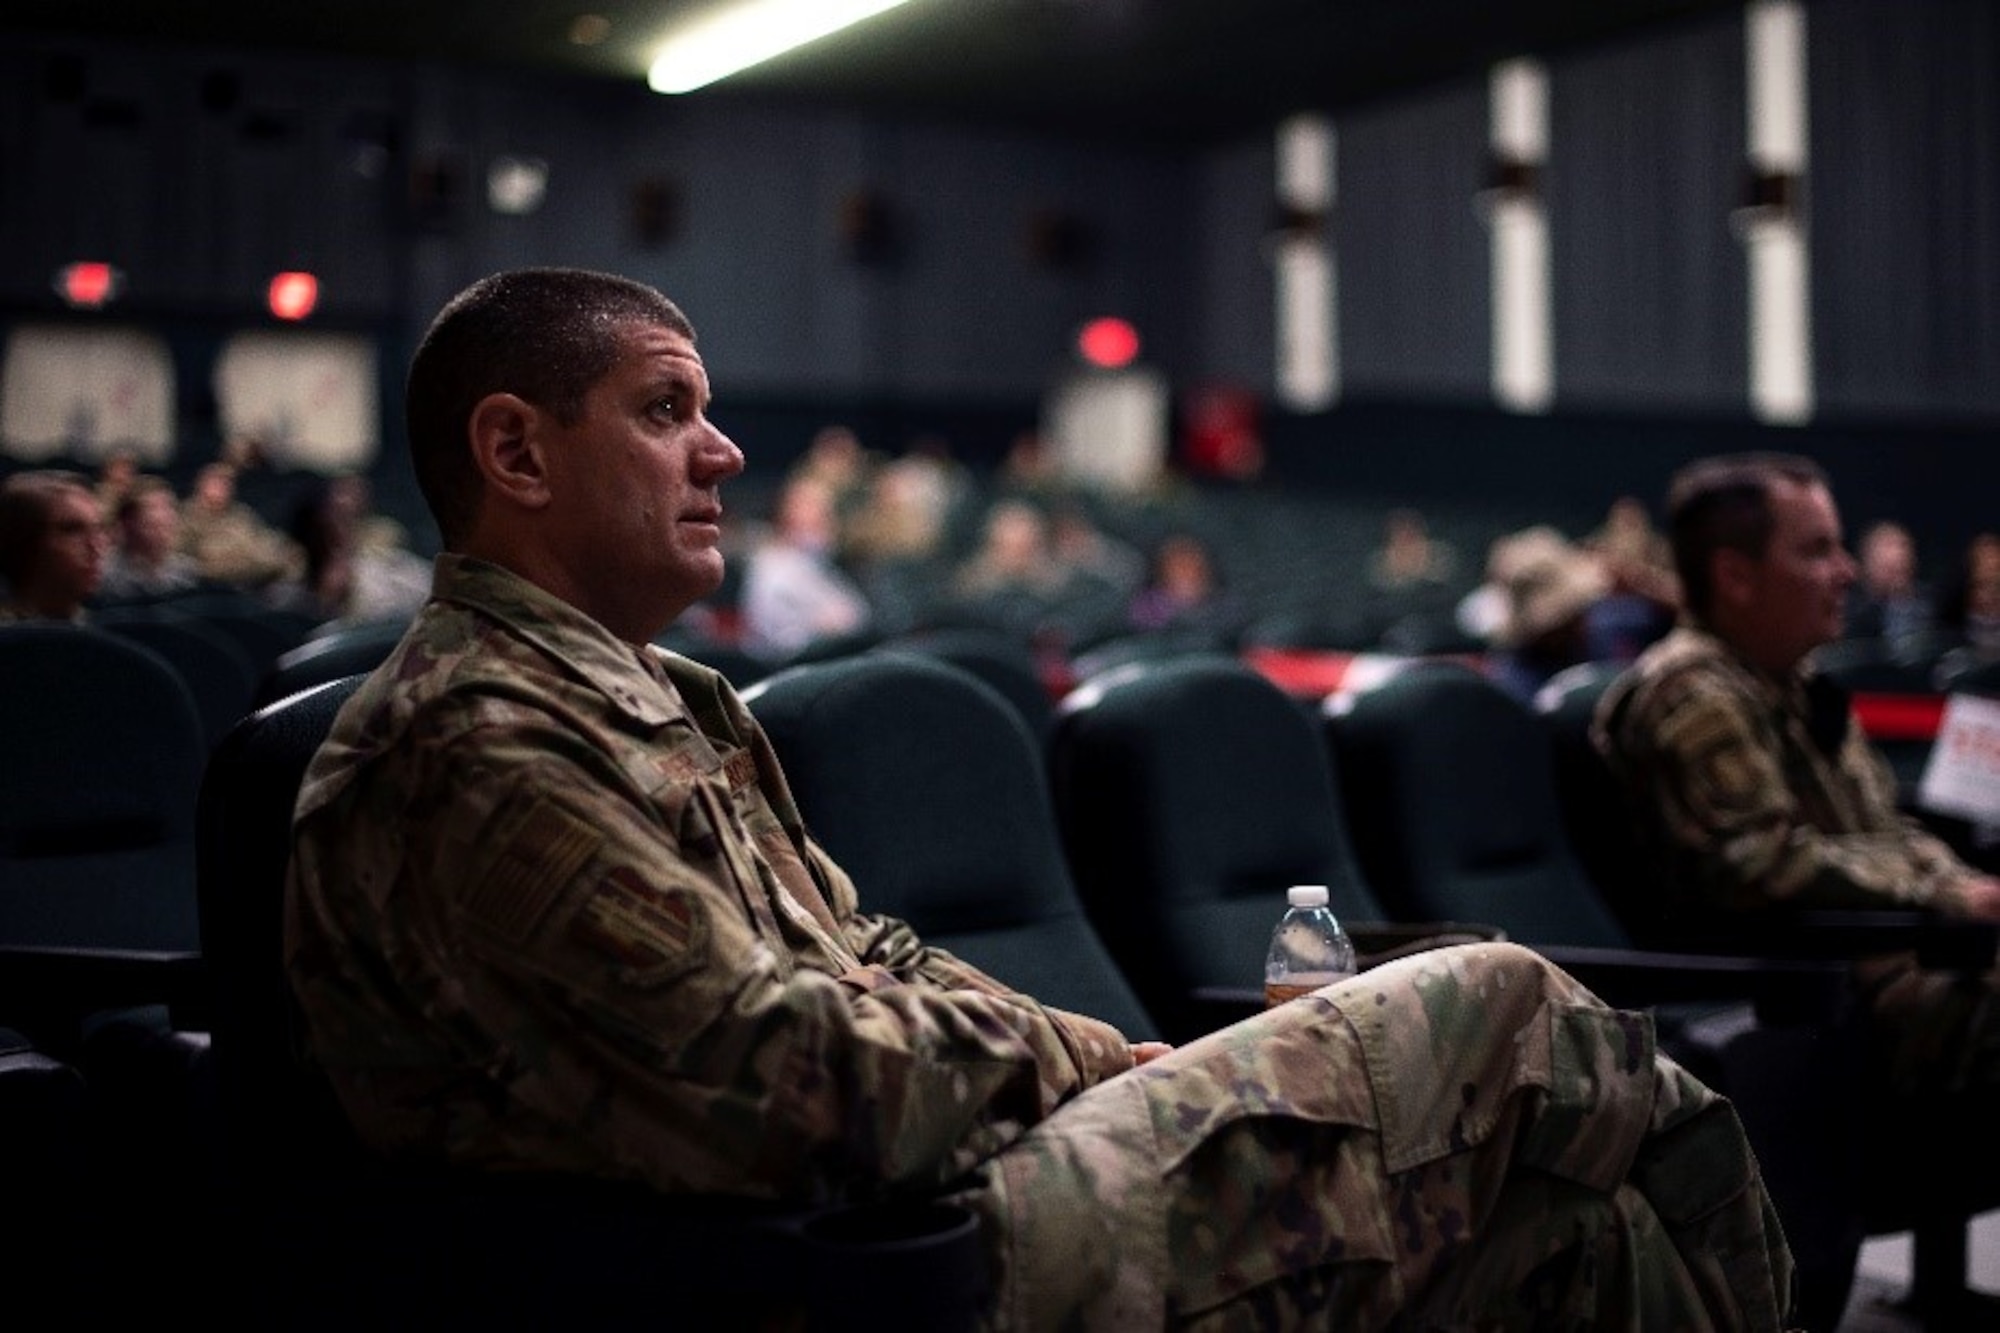 A man in a military uniform sits in a theater with others in attendance while he looks on at someone off screen.